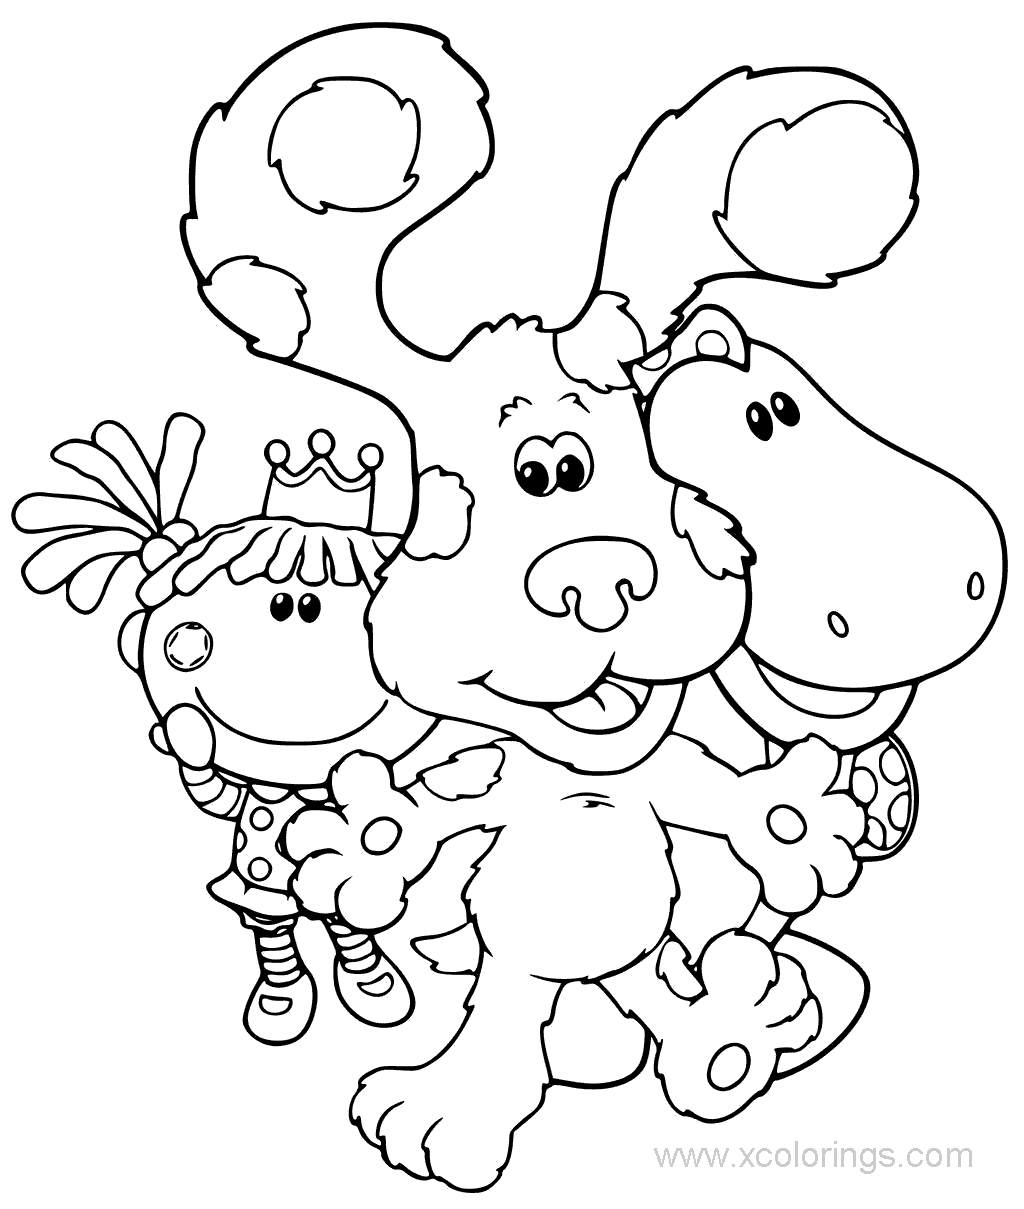 Free Blues Clues Blue and Friends Coloring Pages printable